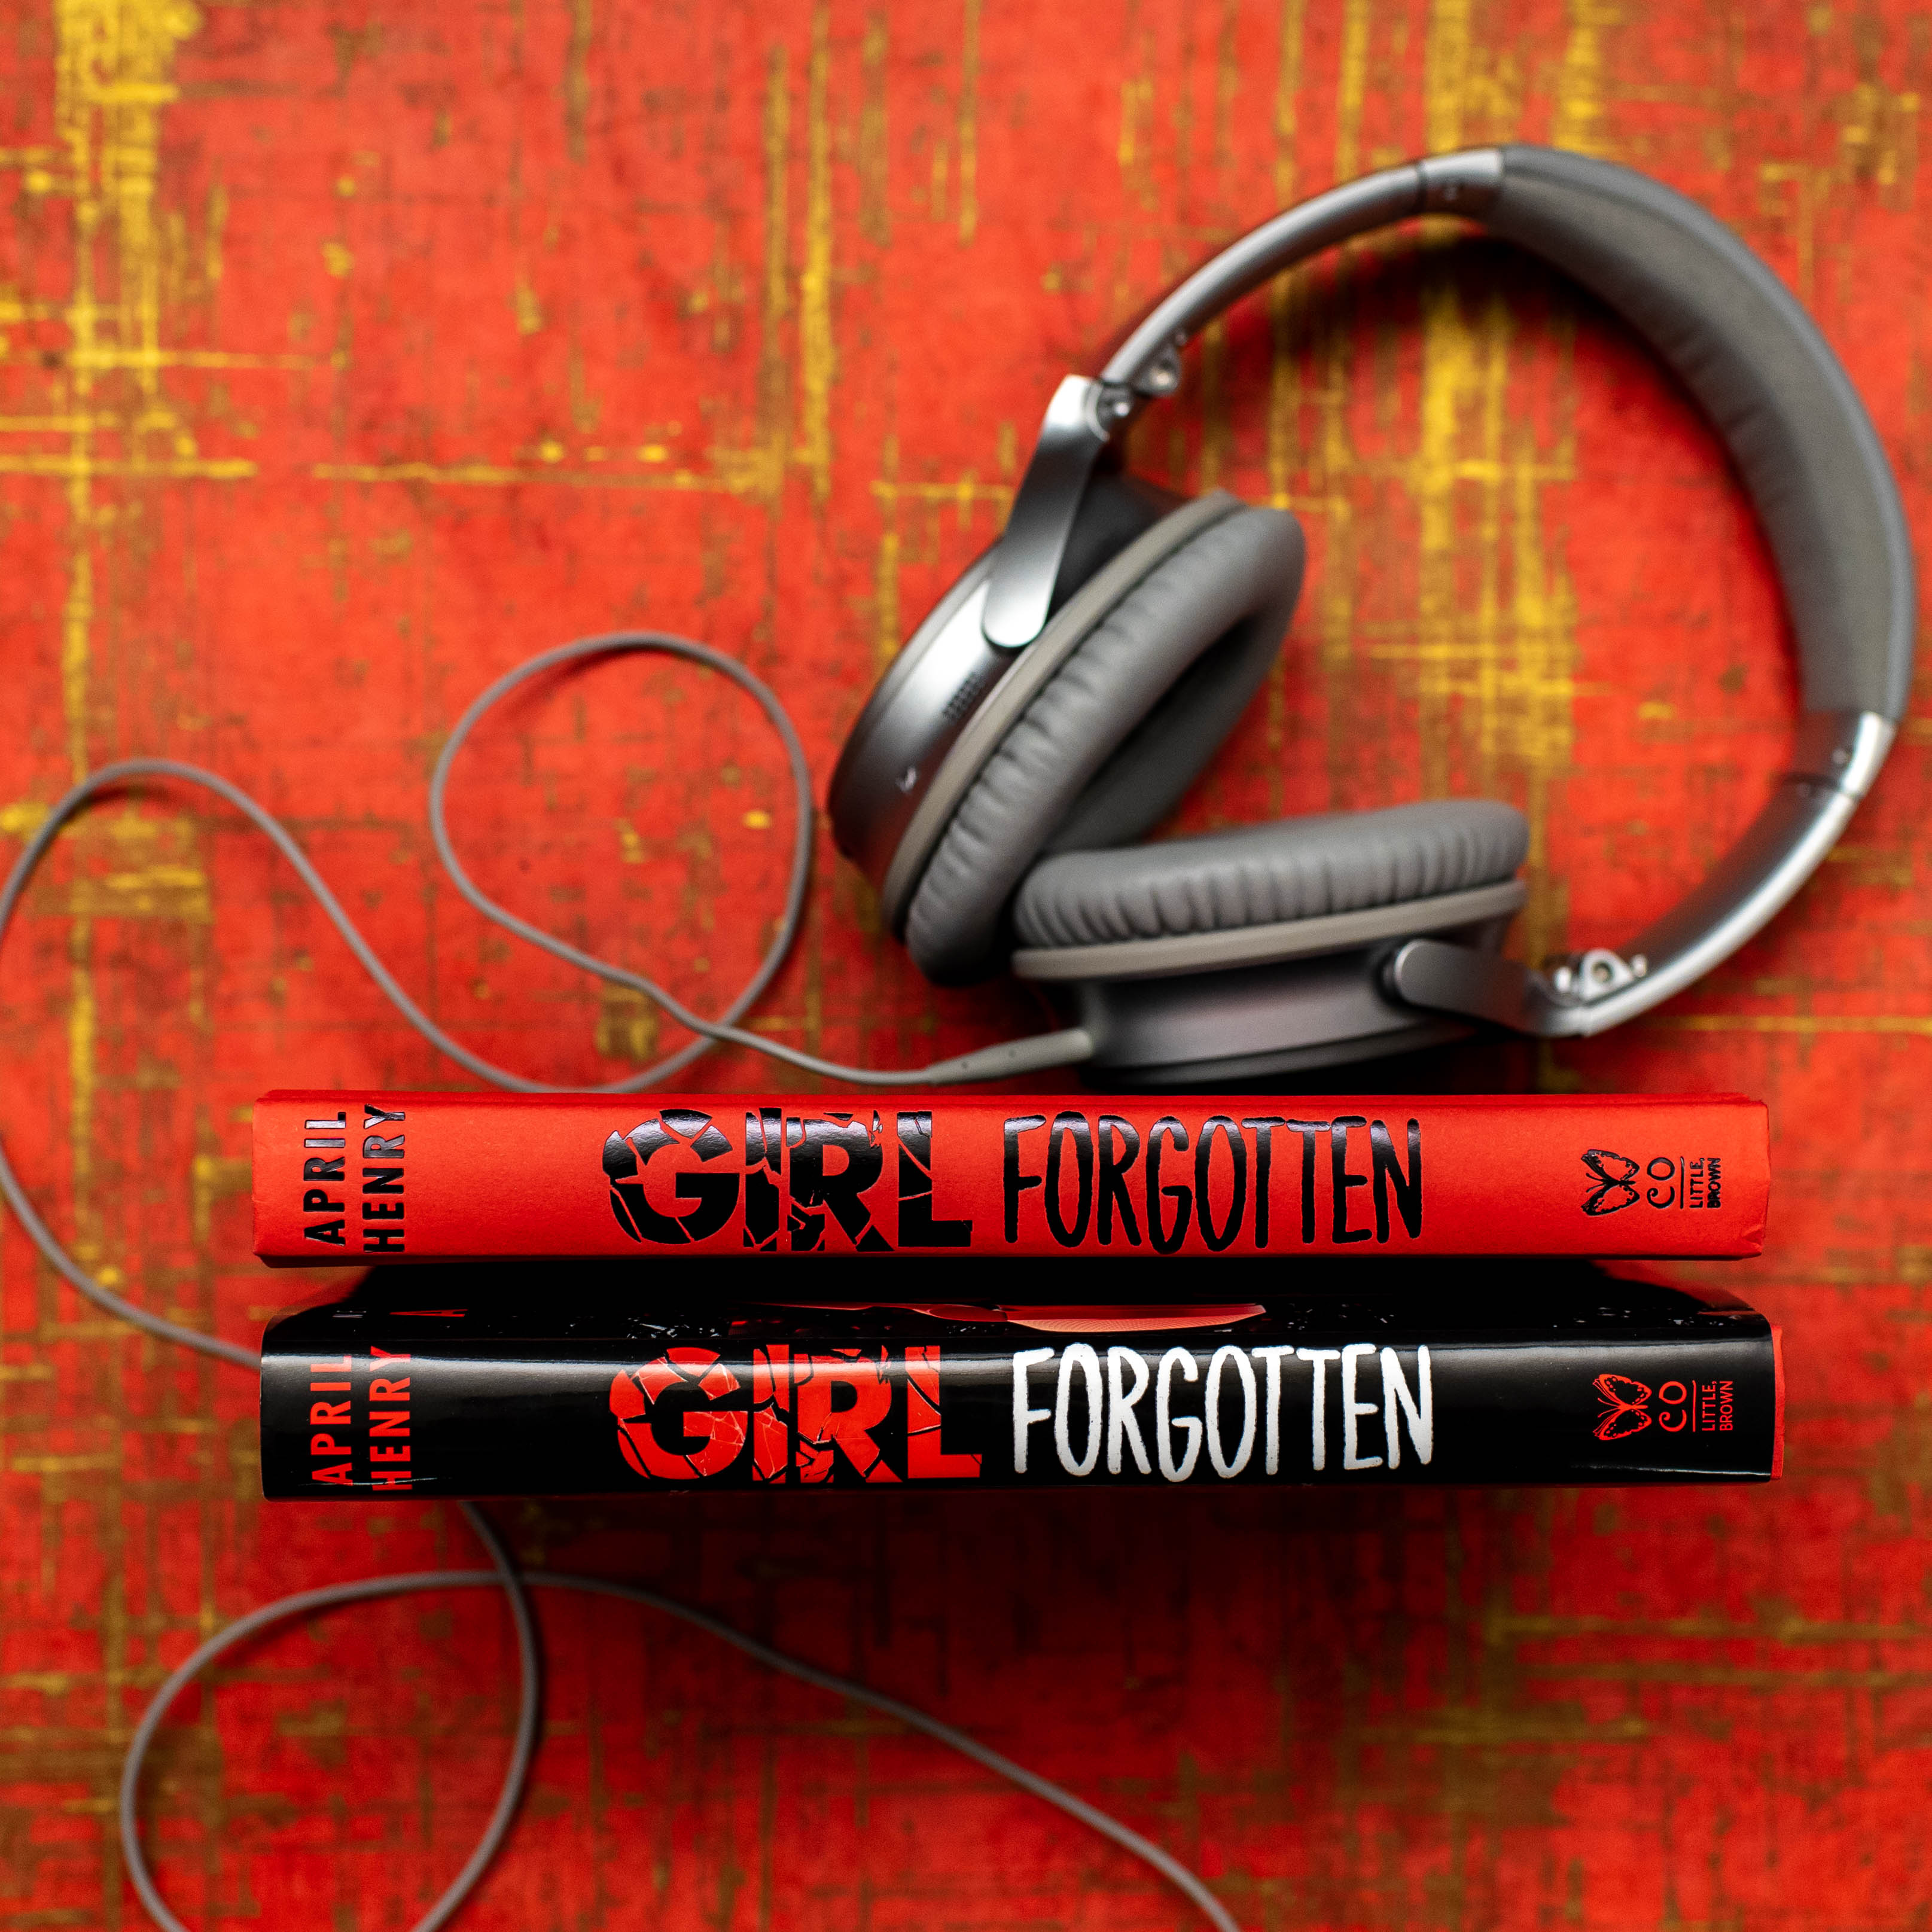 Instagram image of the hardcover spines of "Girl Forgotten" by April Henry